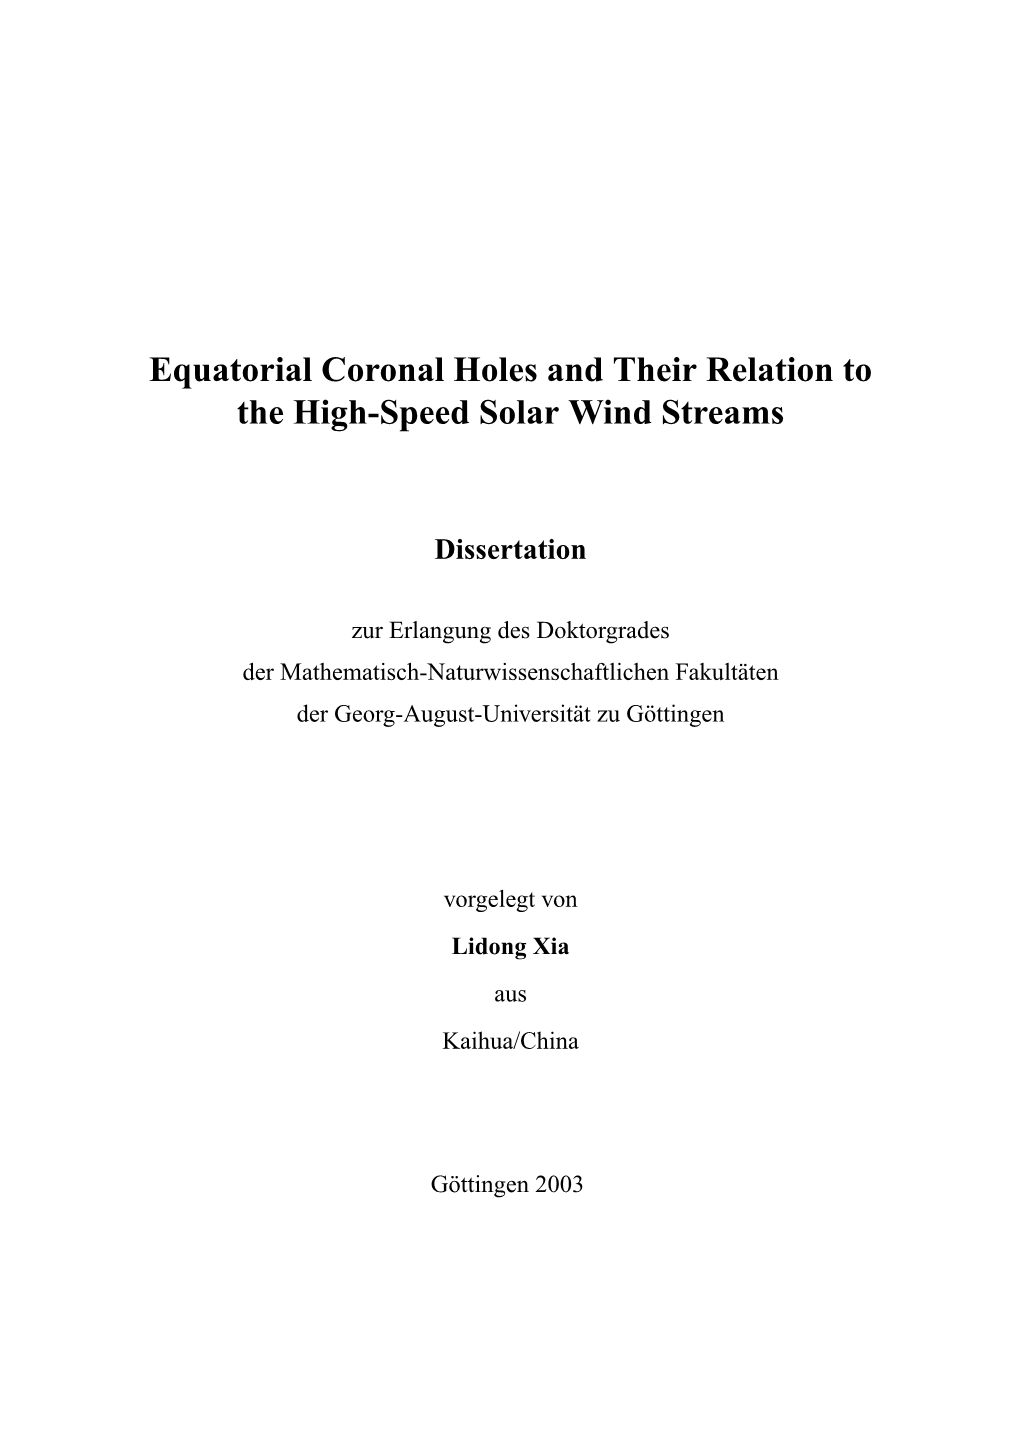 Equatorial Coronal Holes and Their Relation to the High-Speed Solar Wind Streams